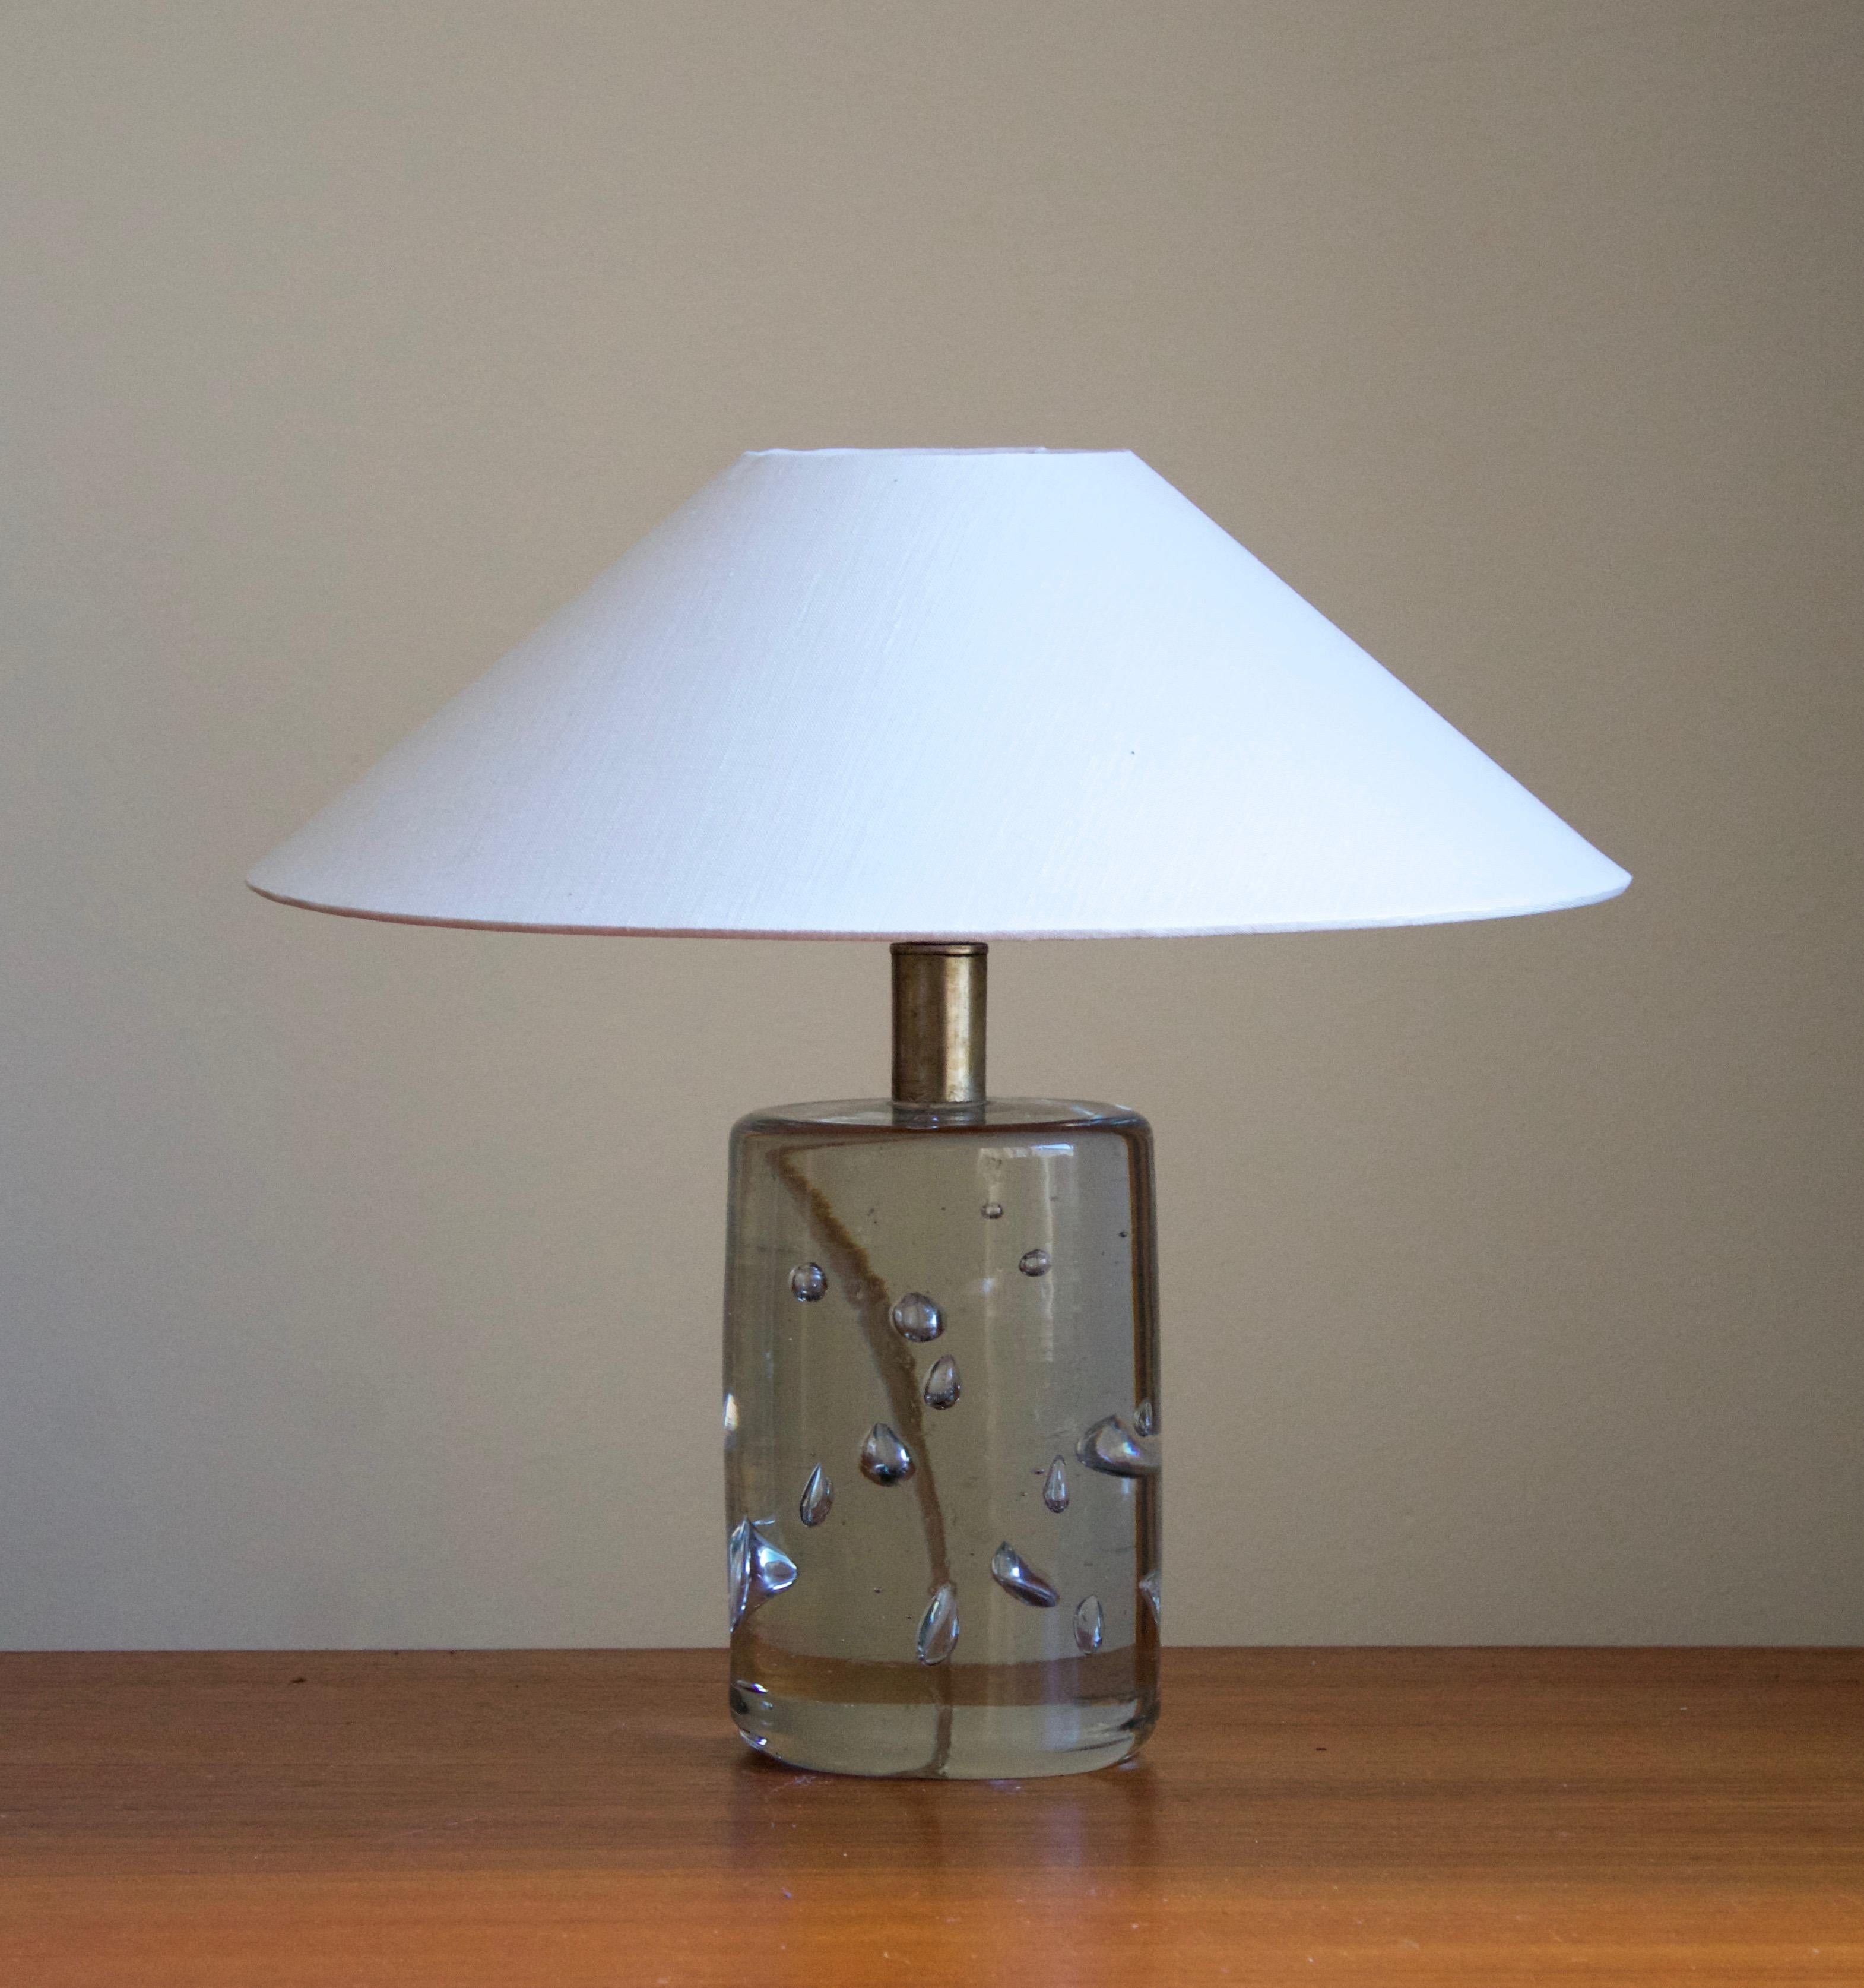 An early and sizable version table lamp by Josef Frank, in brass and studio glass from Reijmyre Glasbruk. Produced by Svenskt Tenn, 1950s.

Stated dimensions excluding lampshade. Sold without lampshade.

Other lighting designers of the period